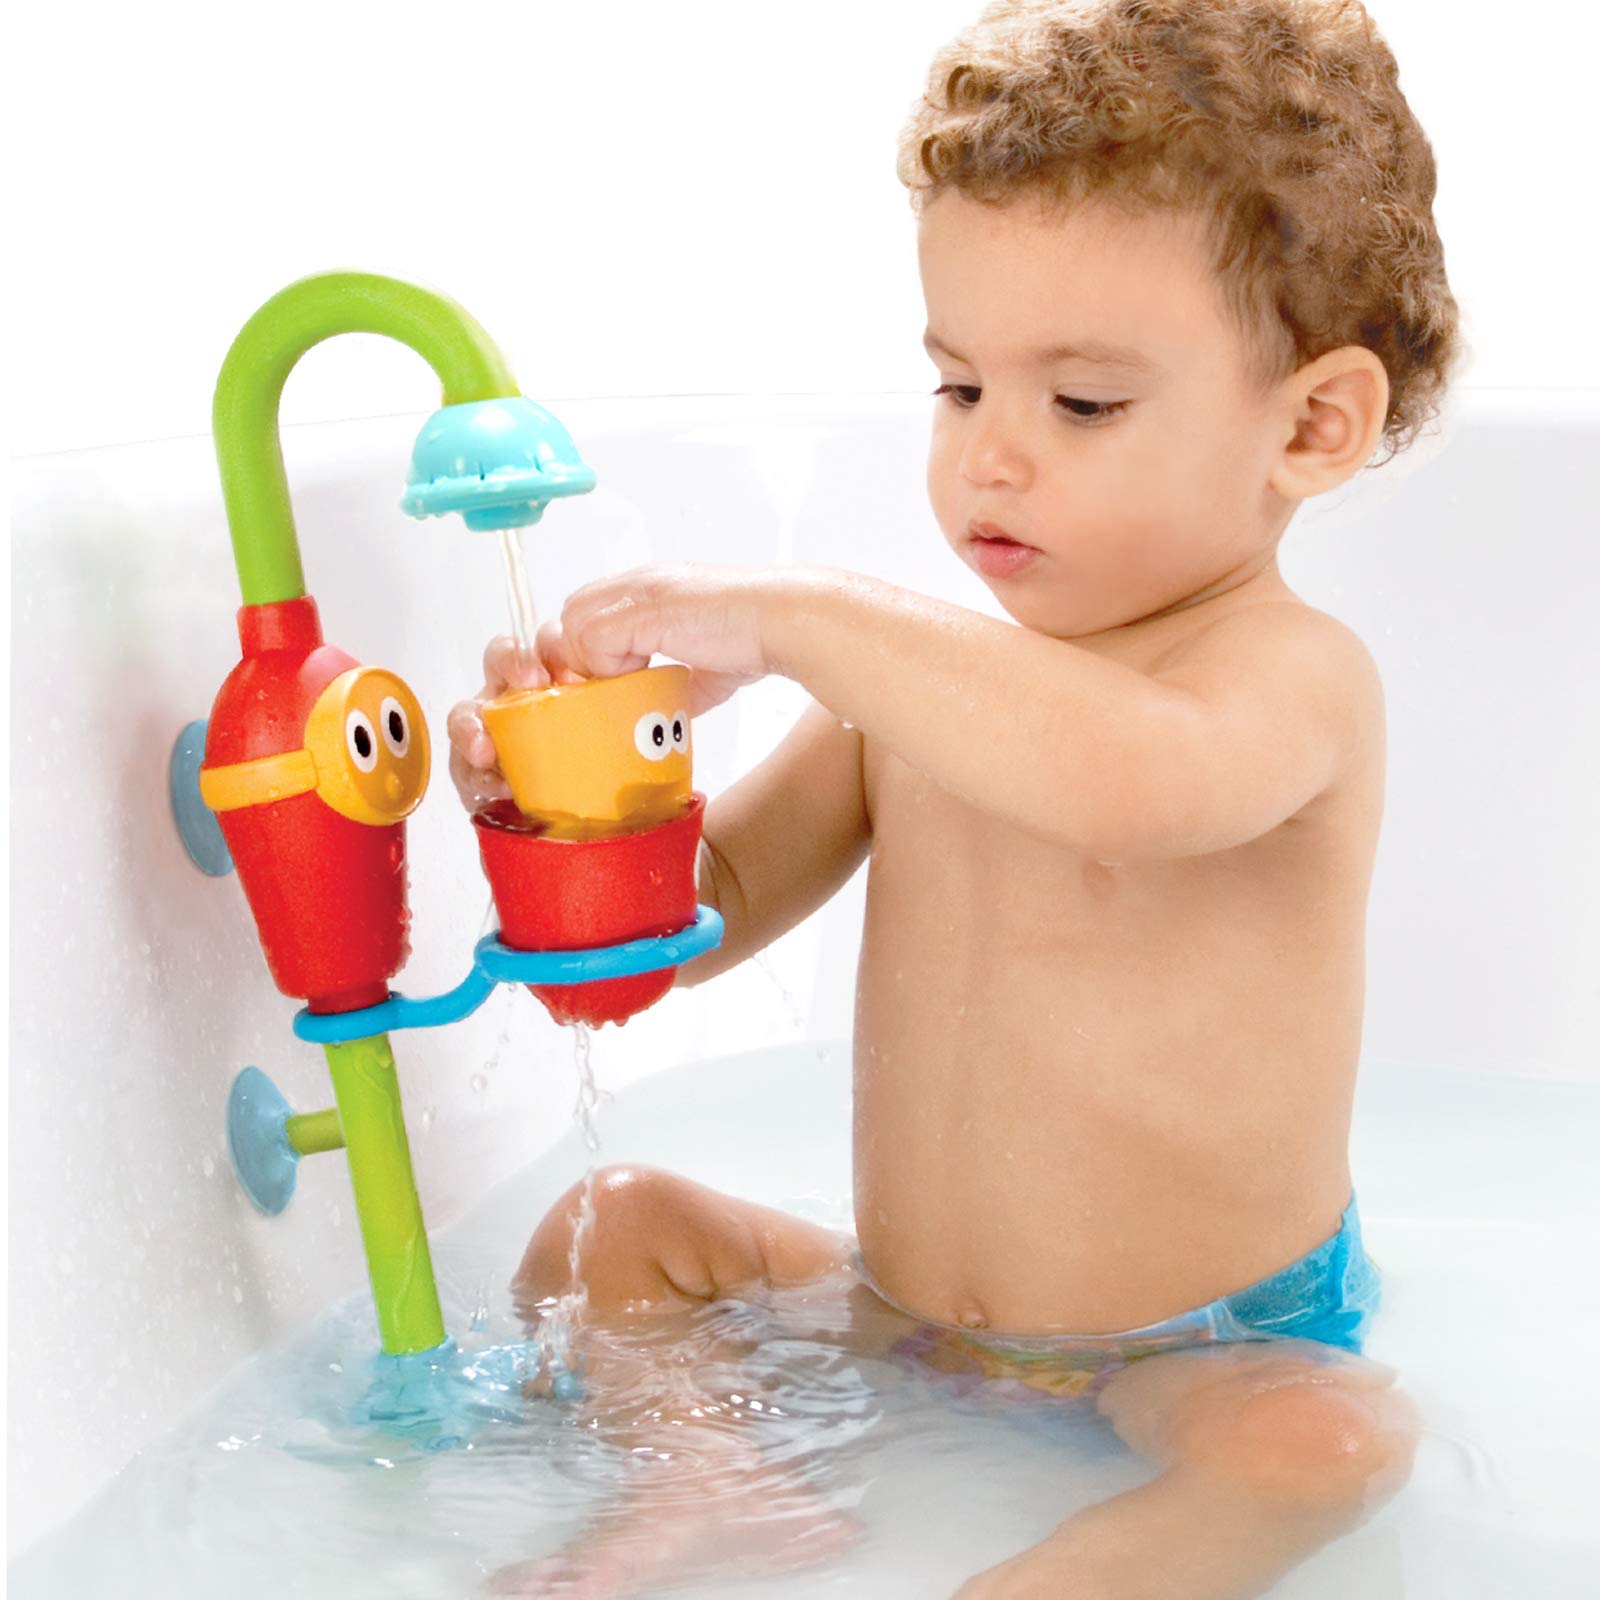 Yookidoo Toddler Bath Toy - Flow N Fill Spout - Three Stackable Play Cups and Water Spray Spout for Kids Bathtime Fun